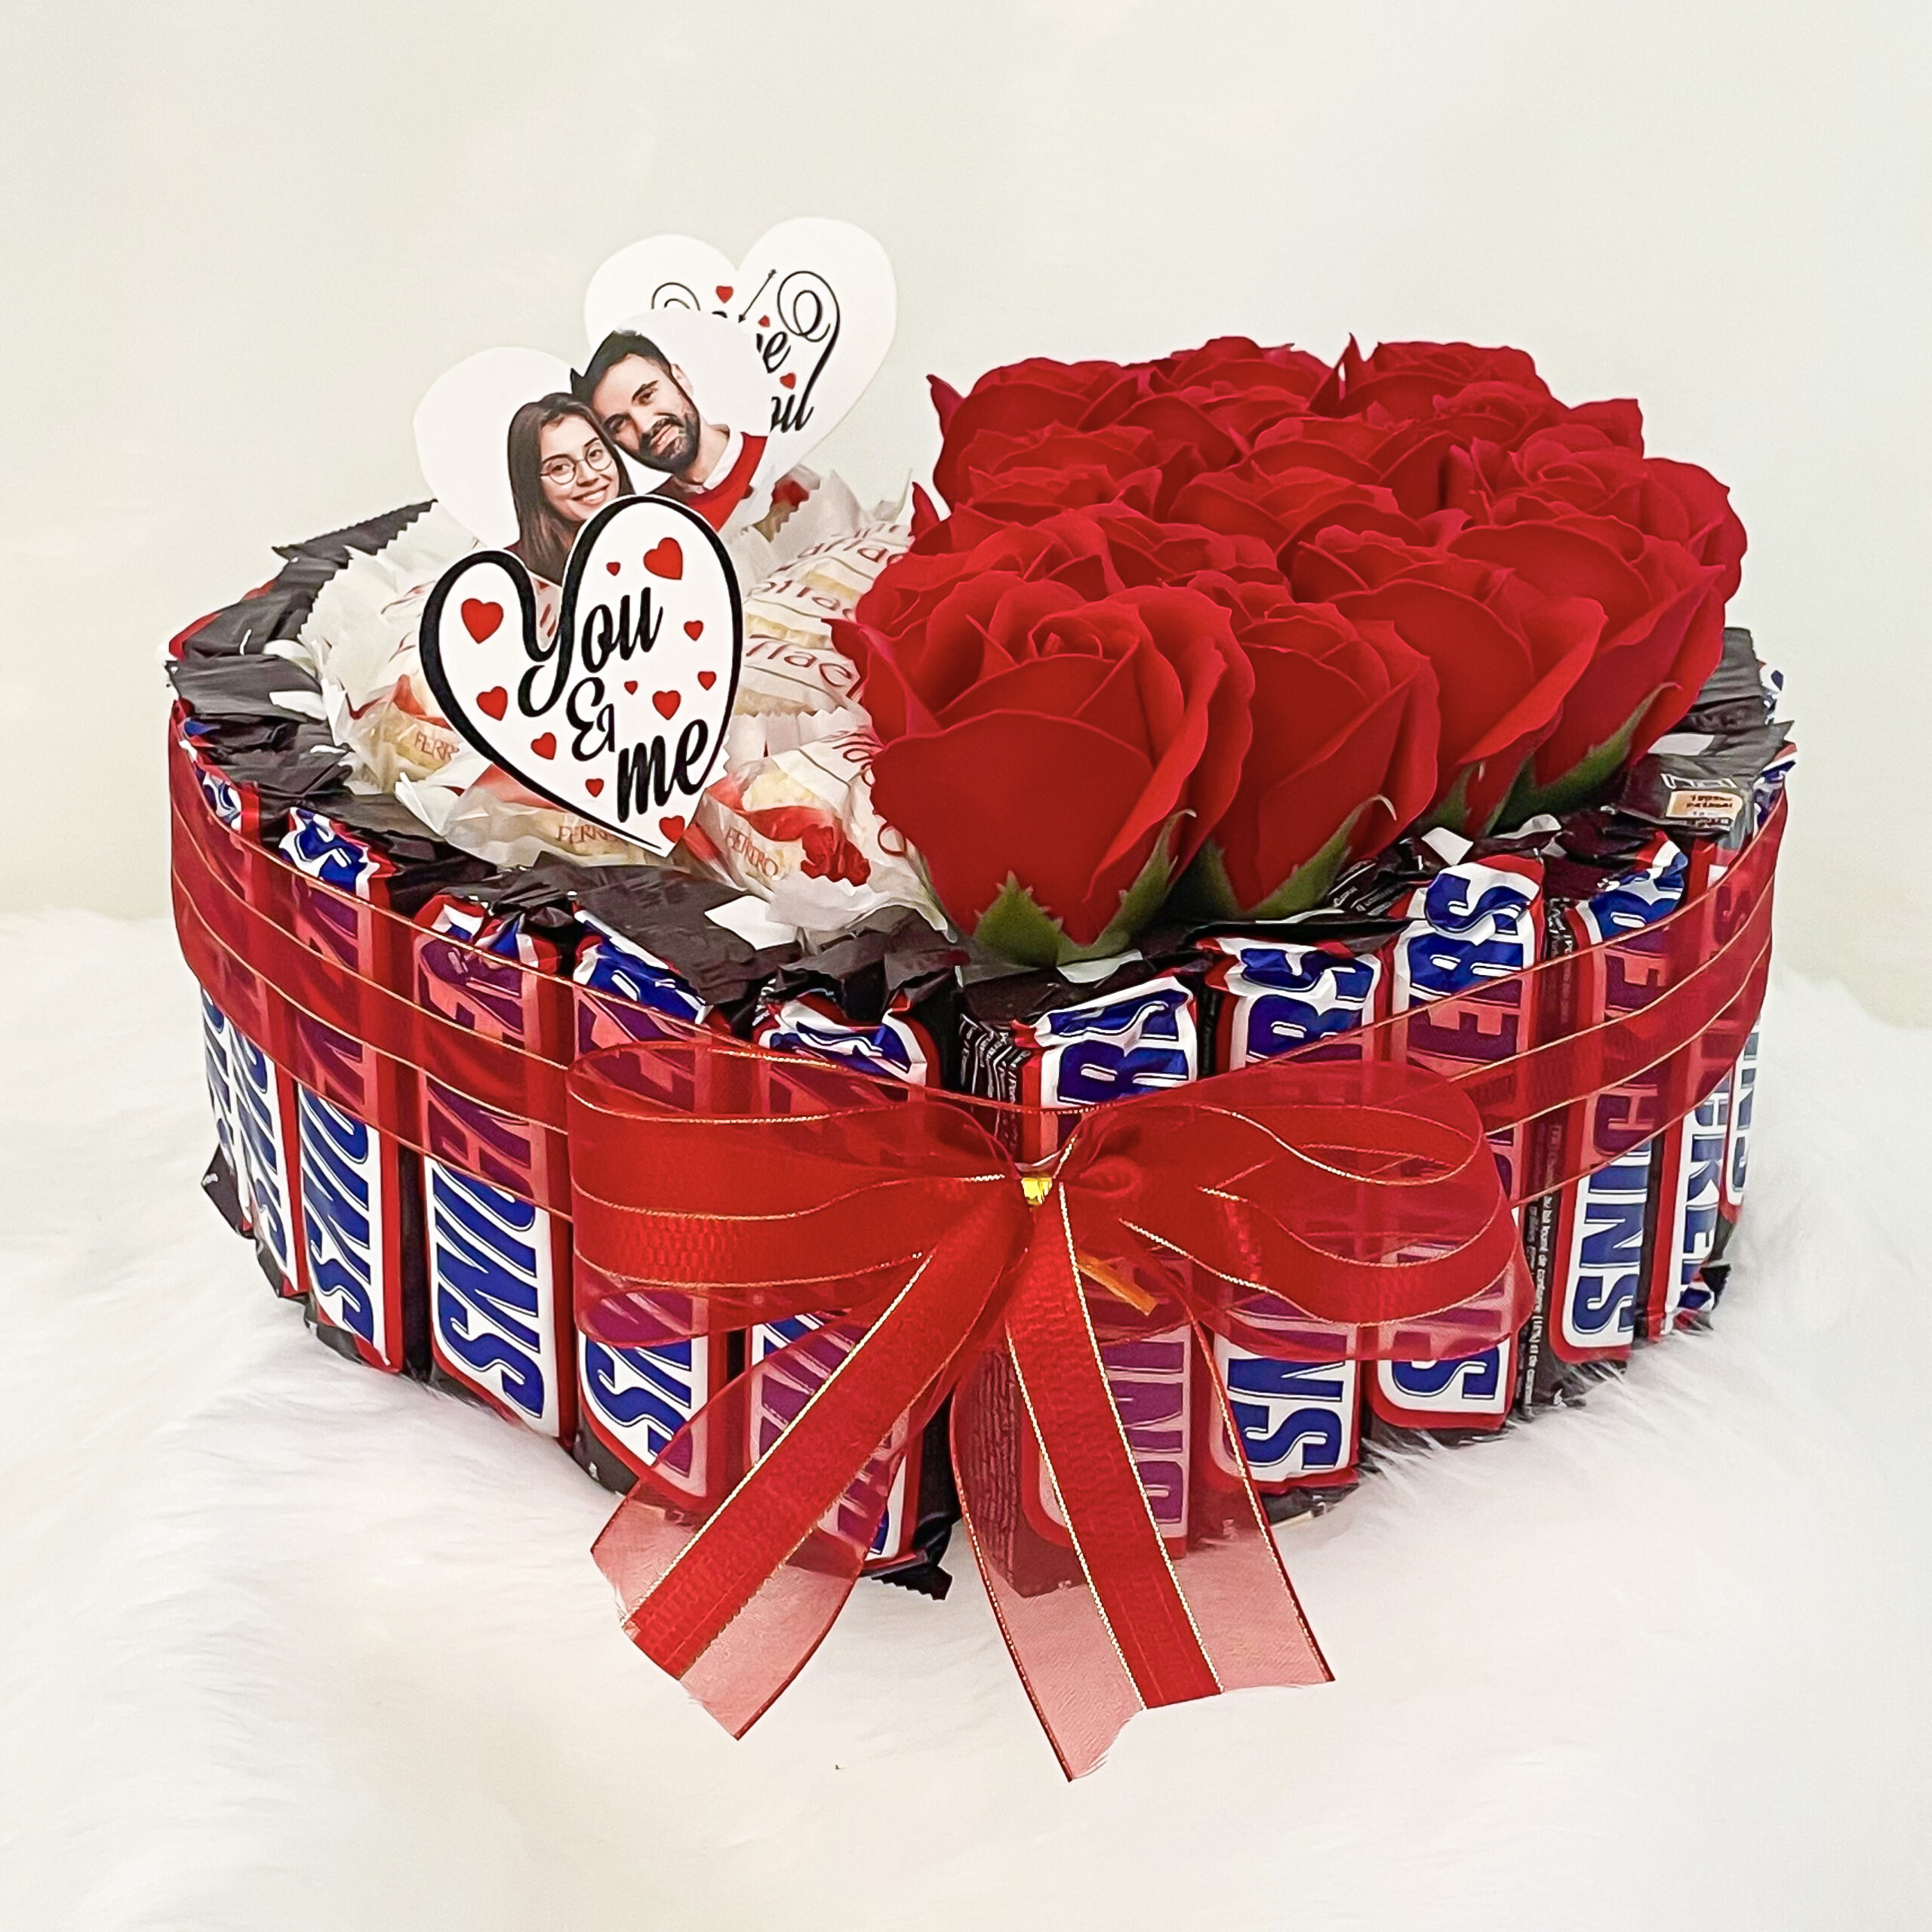 38 Valentine's Day gift basket ideas for him, her and kids